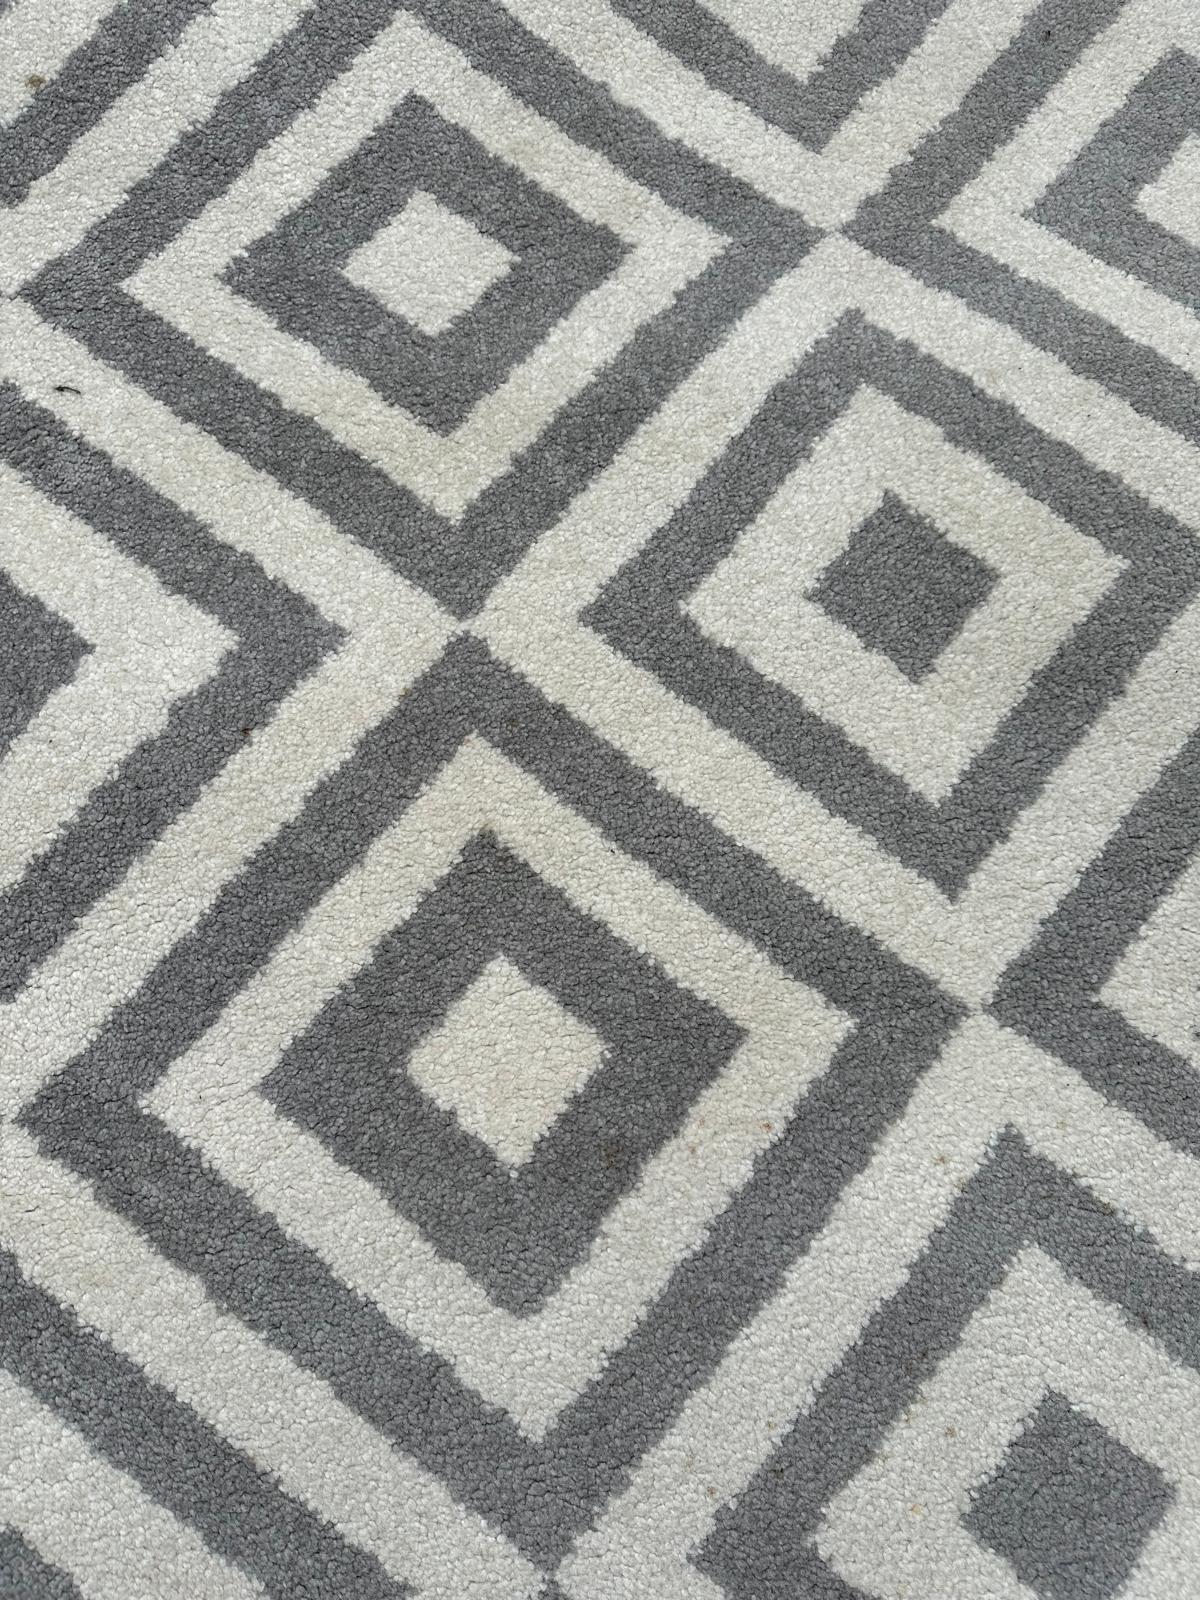 A contemporary rug in a grey and white geometric pattern 160cm x 220cm - Image 4 of 4